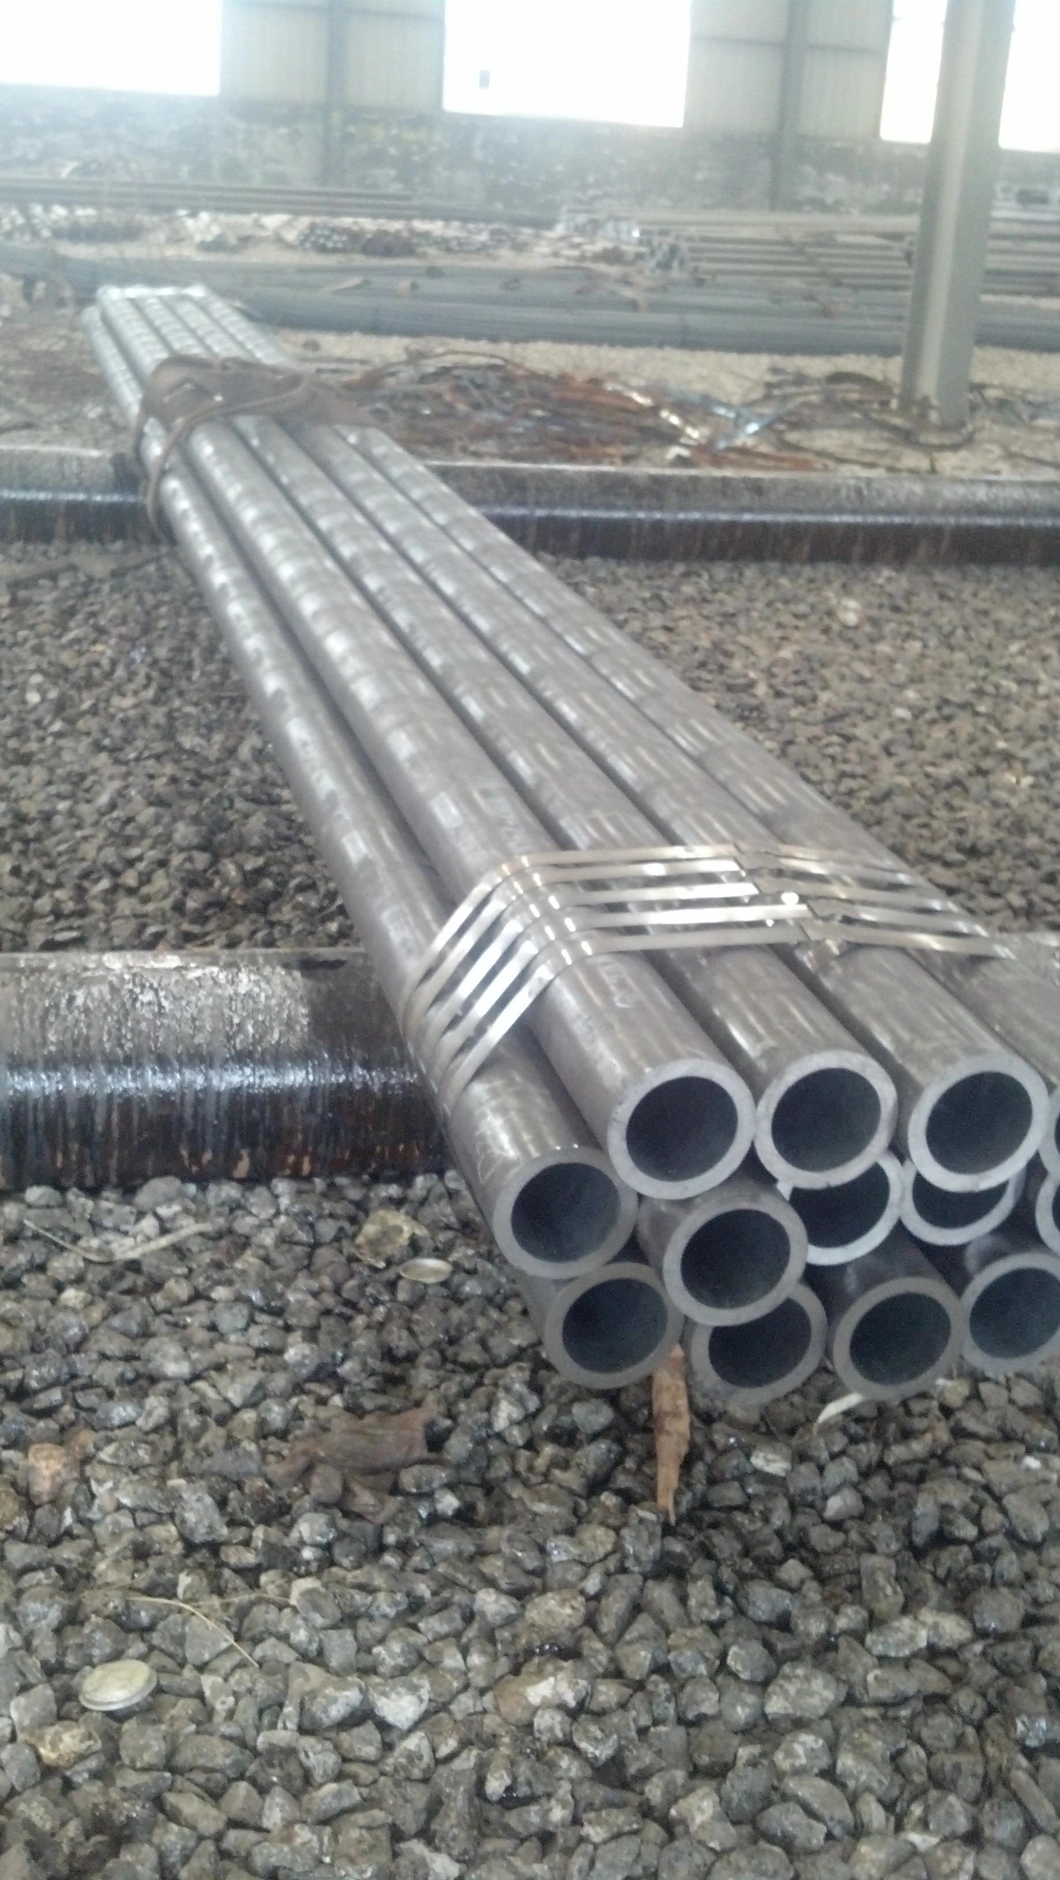 ASTM A106 Seamless Steel Pipe Galvanized Seamless Steel Tube Carbon Steel Pipe